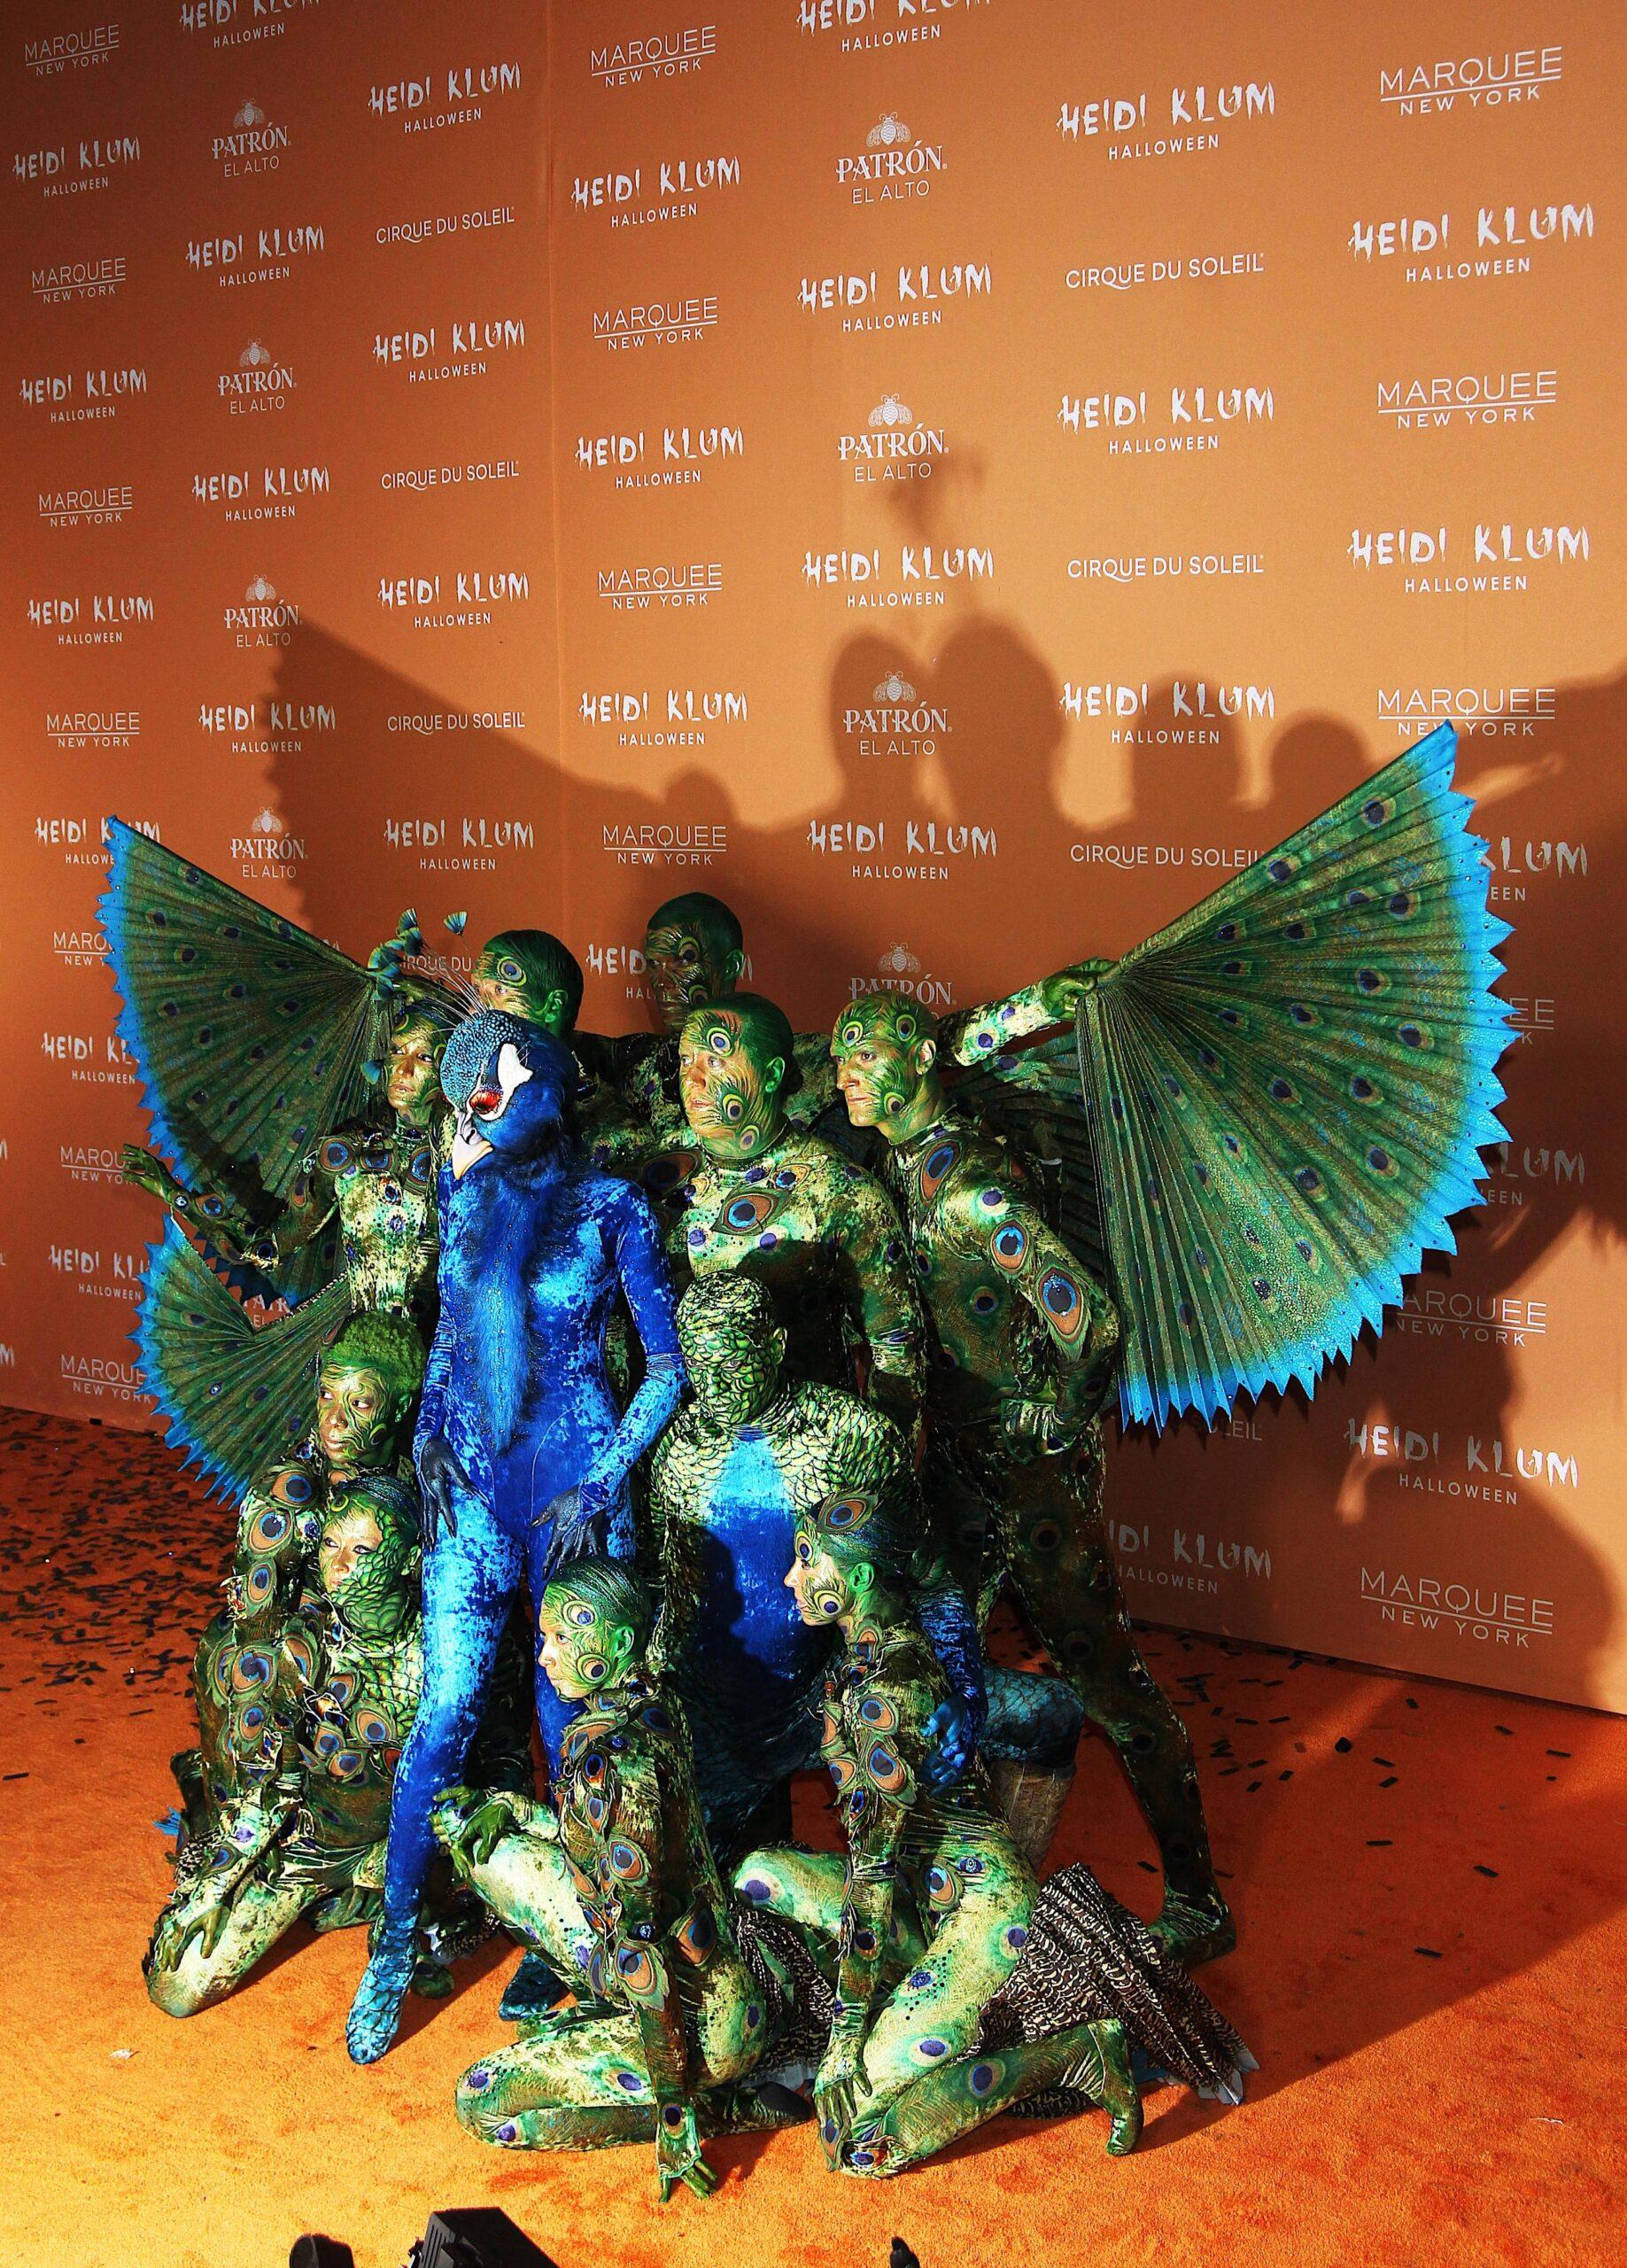 Heidi Klum spreads her wings! Queen of Halloween dresses up as a PEACOCK